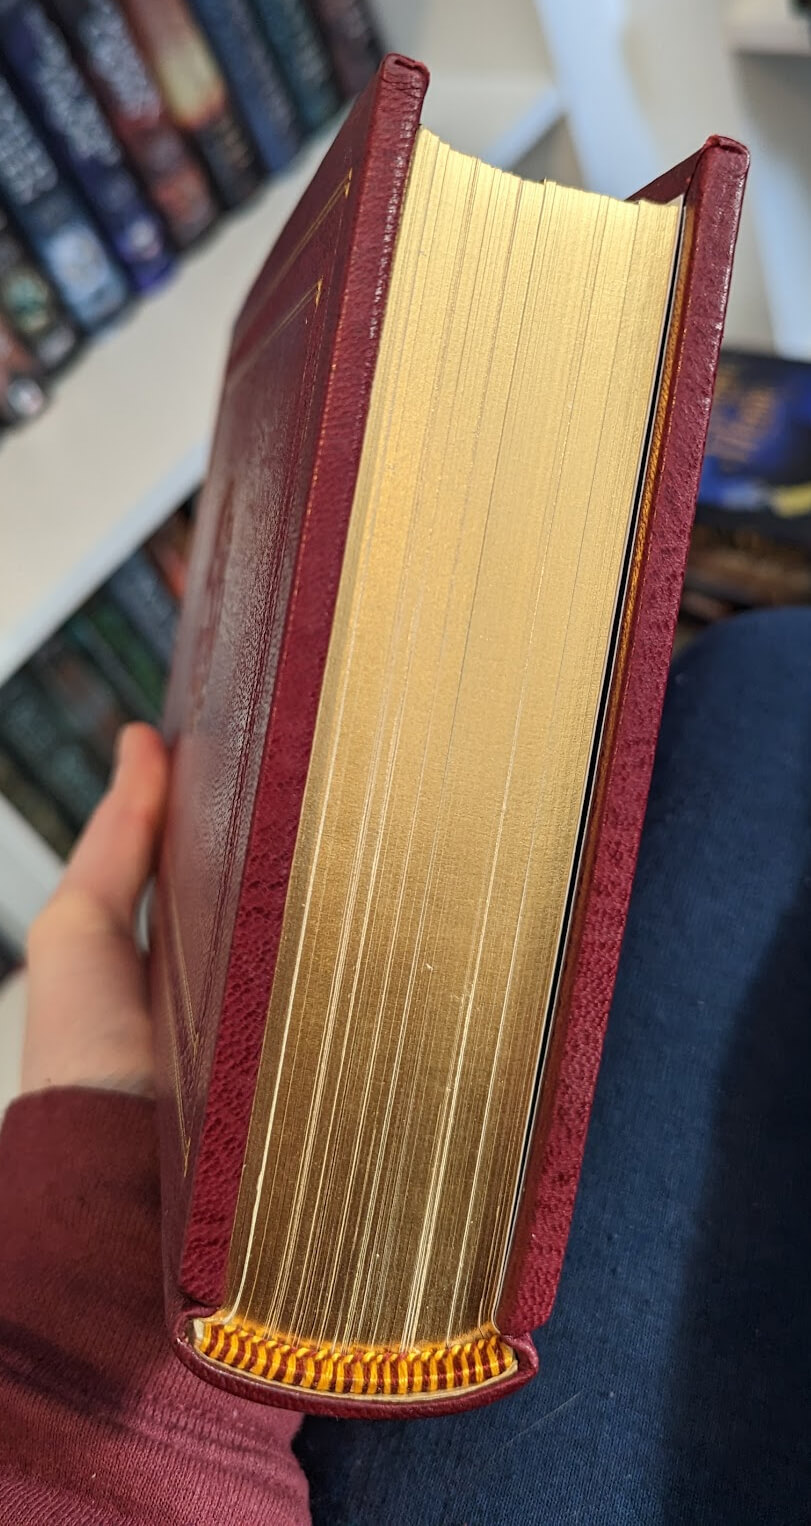 Photo of the gilded edges of a leather-bound book, and a tailband